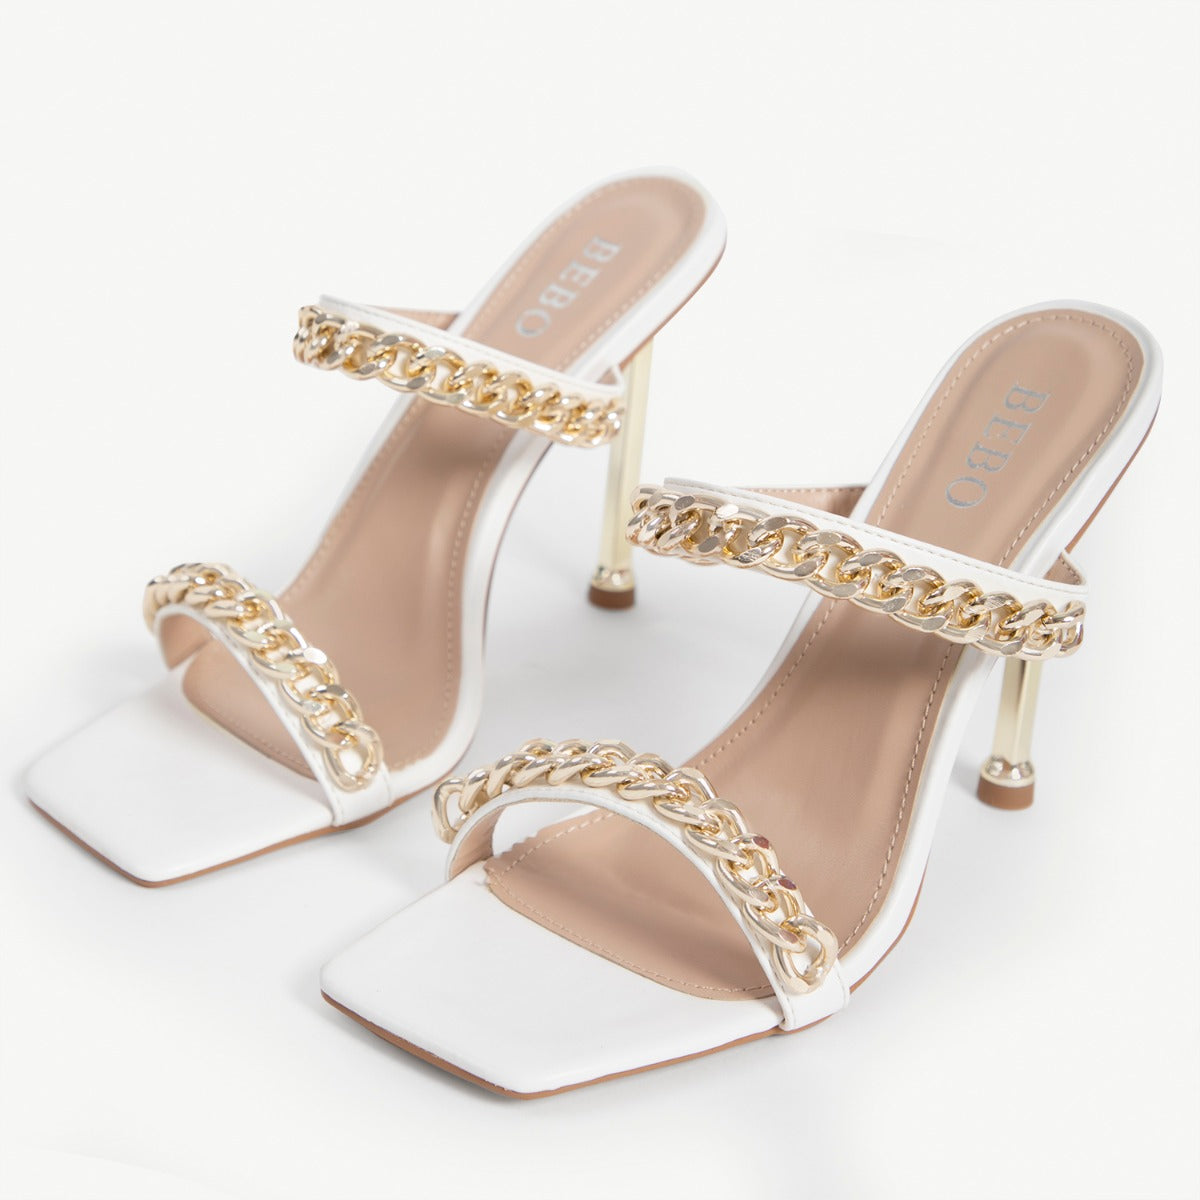 BEBO Neevie Chained Mule in White